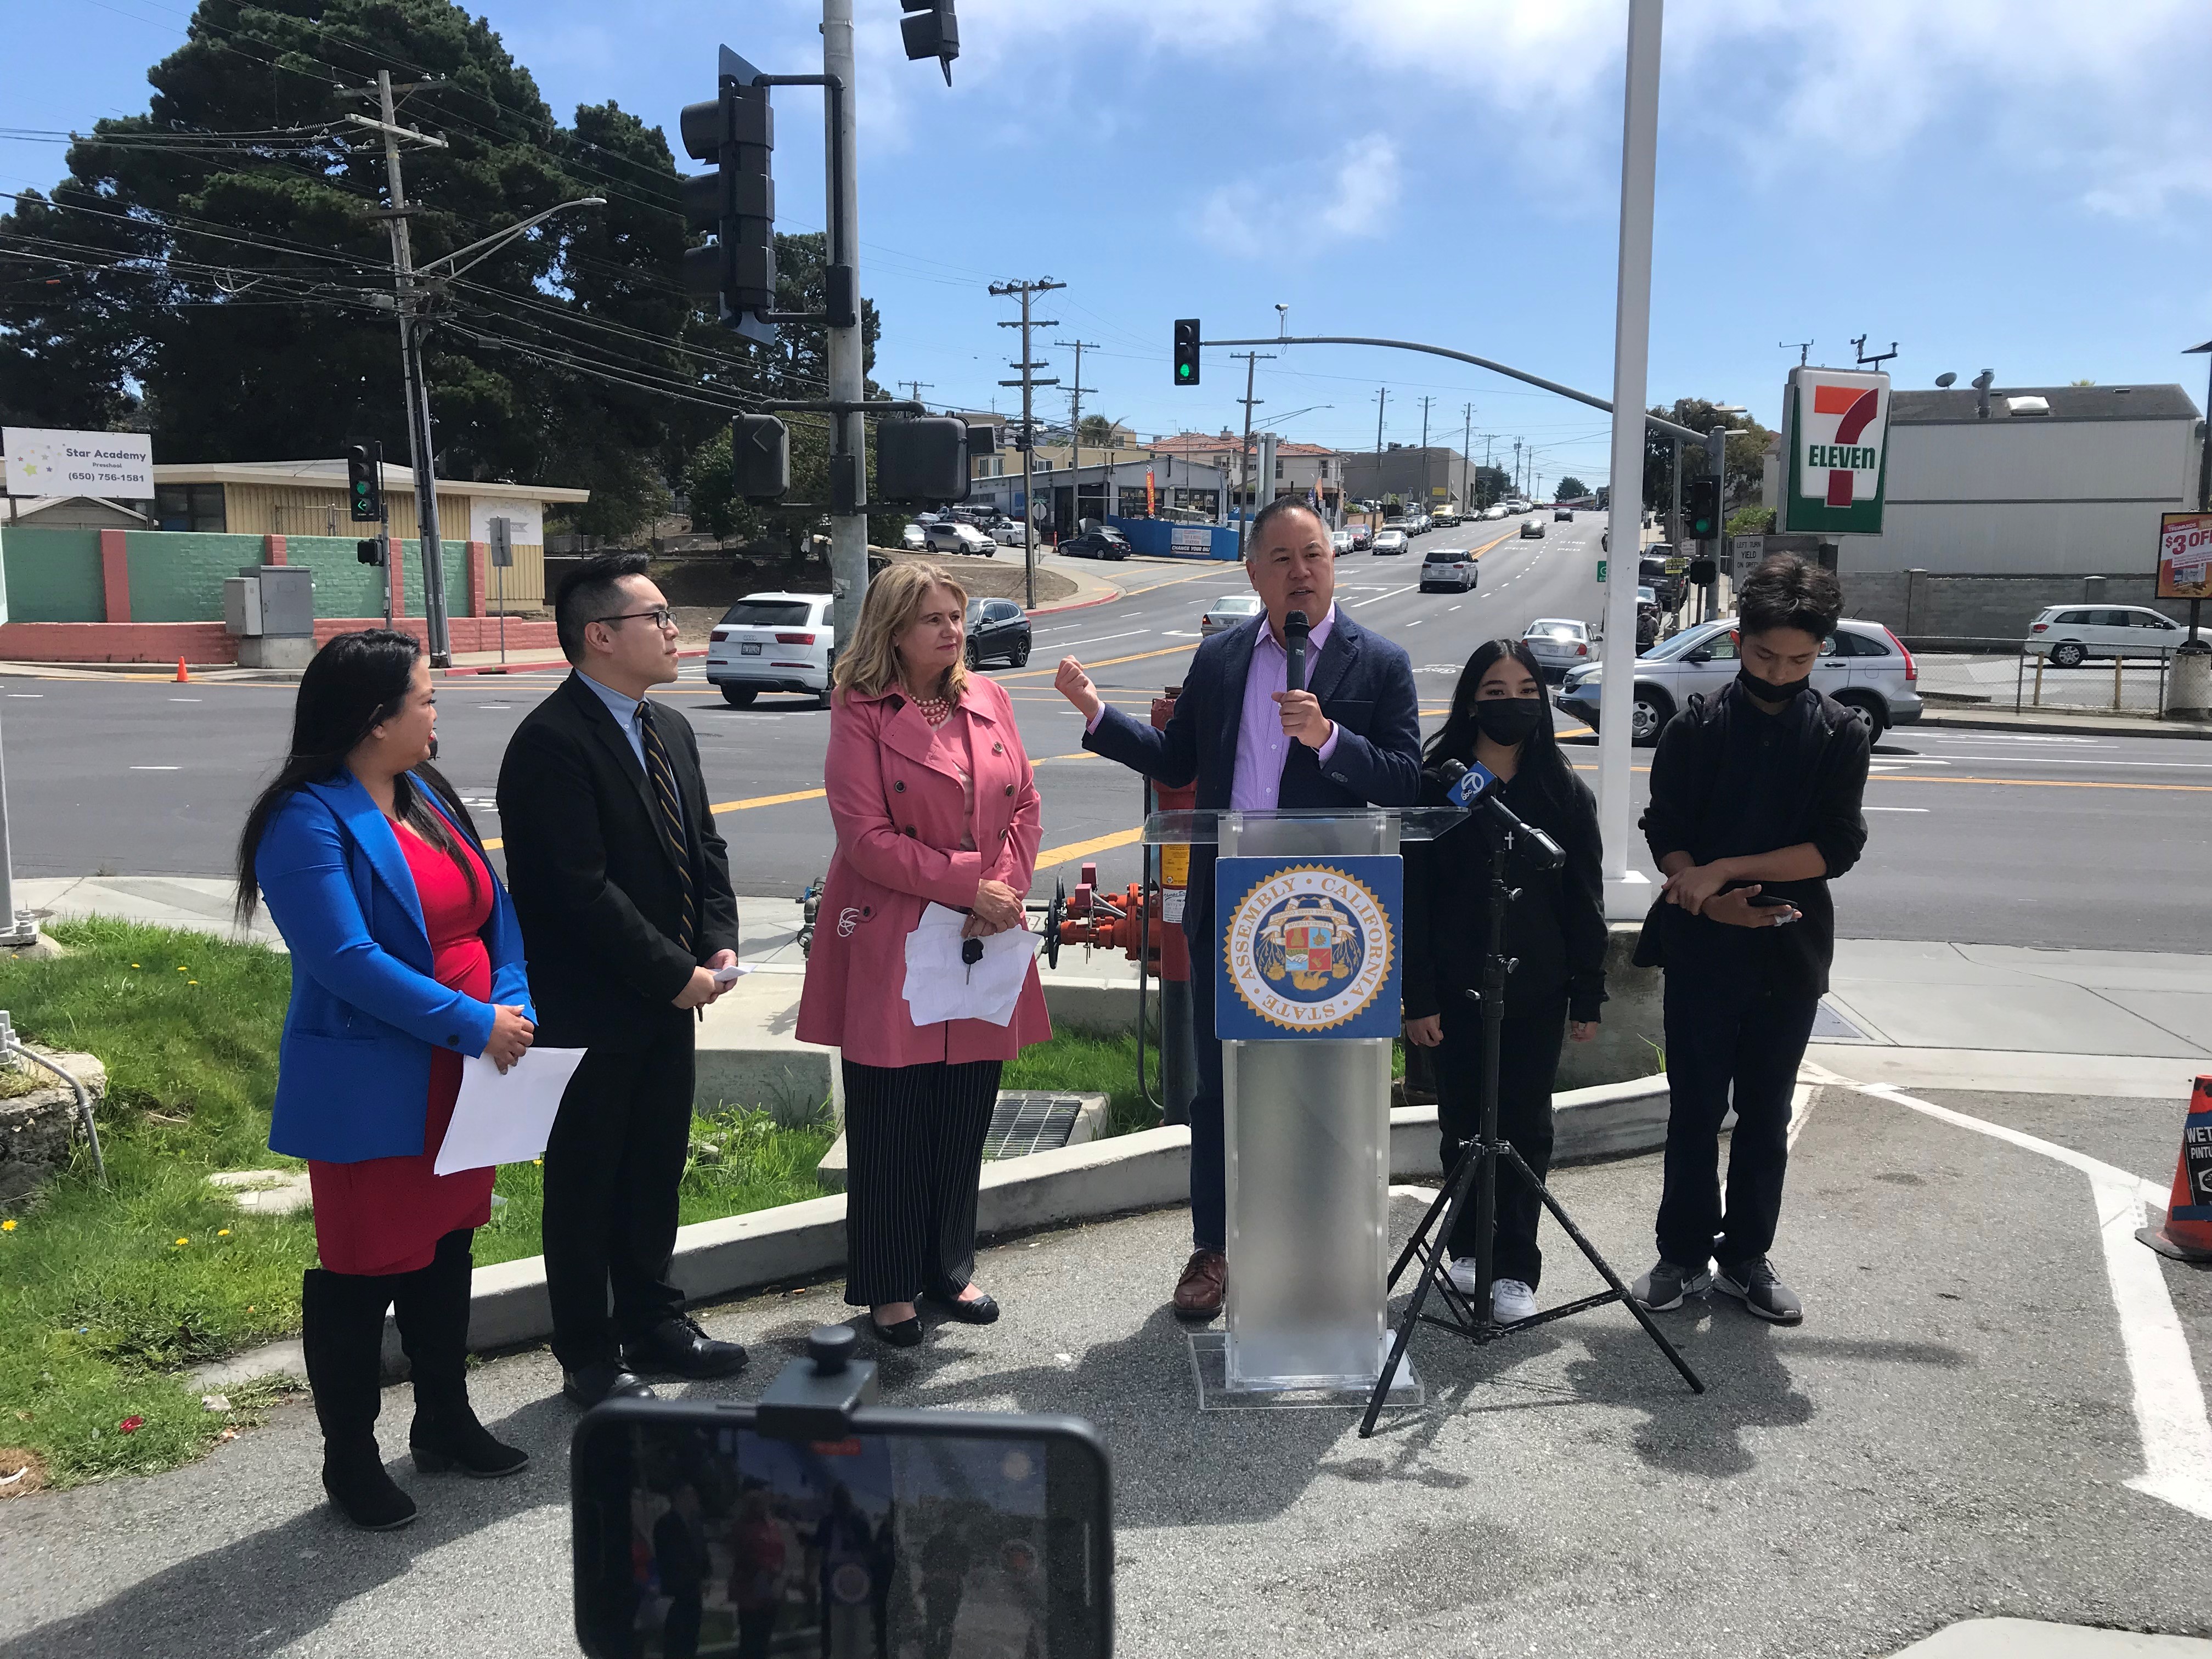 Ting Announces $3.2 Million From California Budget To Jumpstart Daly City’s Safe Routes To School Project